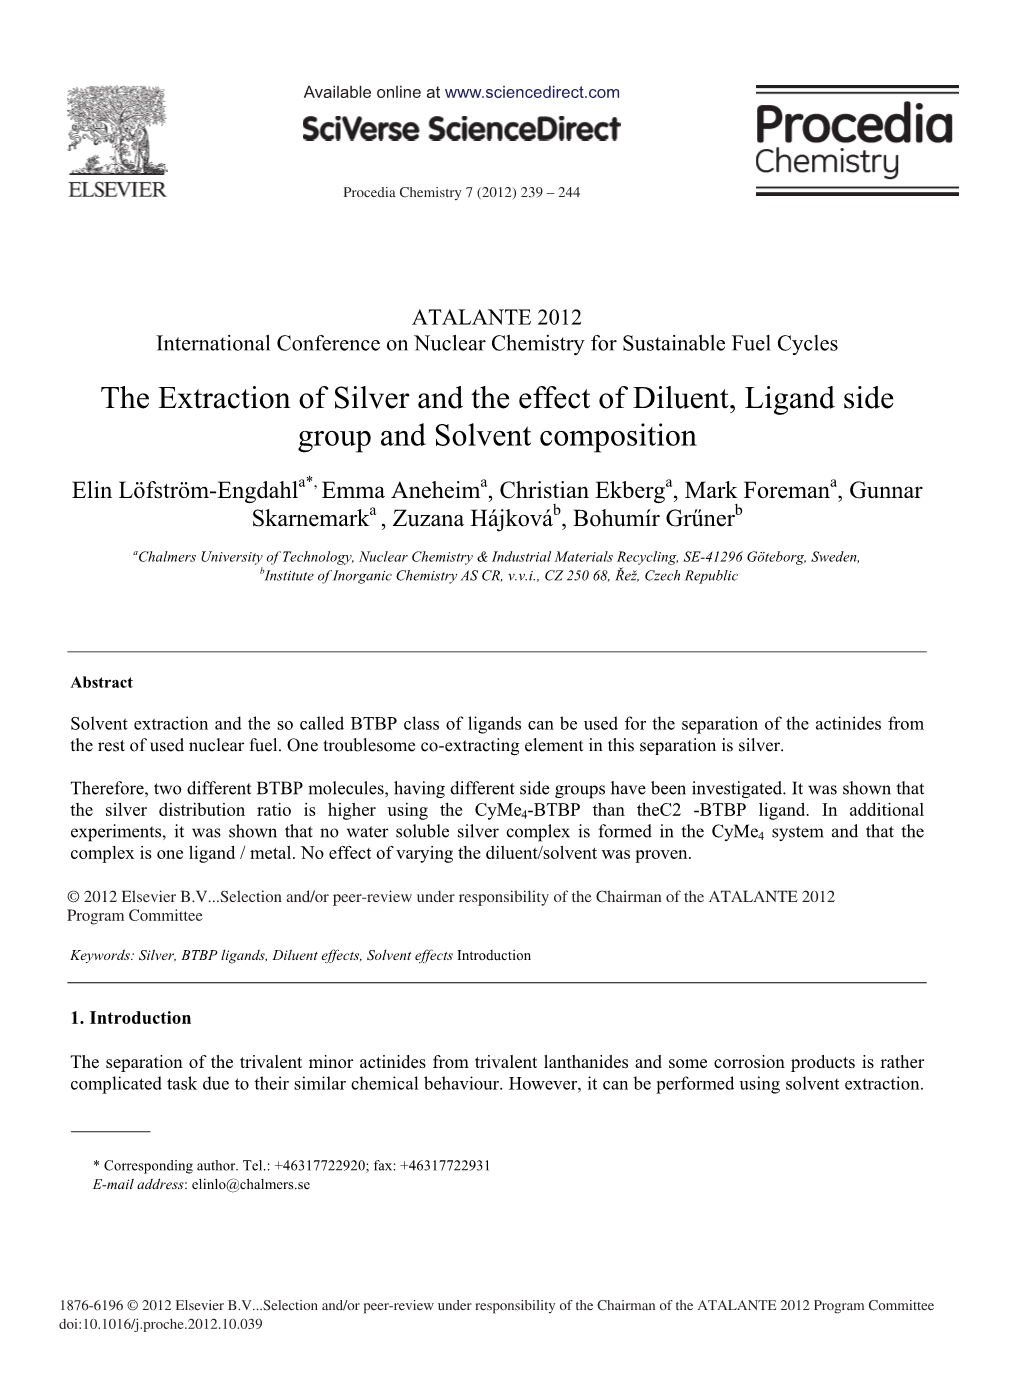 The Extraction of Silver and the Effect of Diluent, Ligand Side Group and Solvent Composition